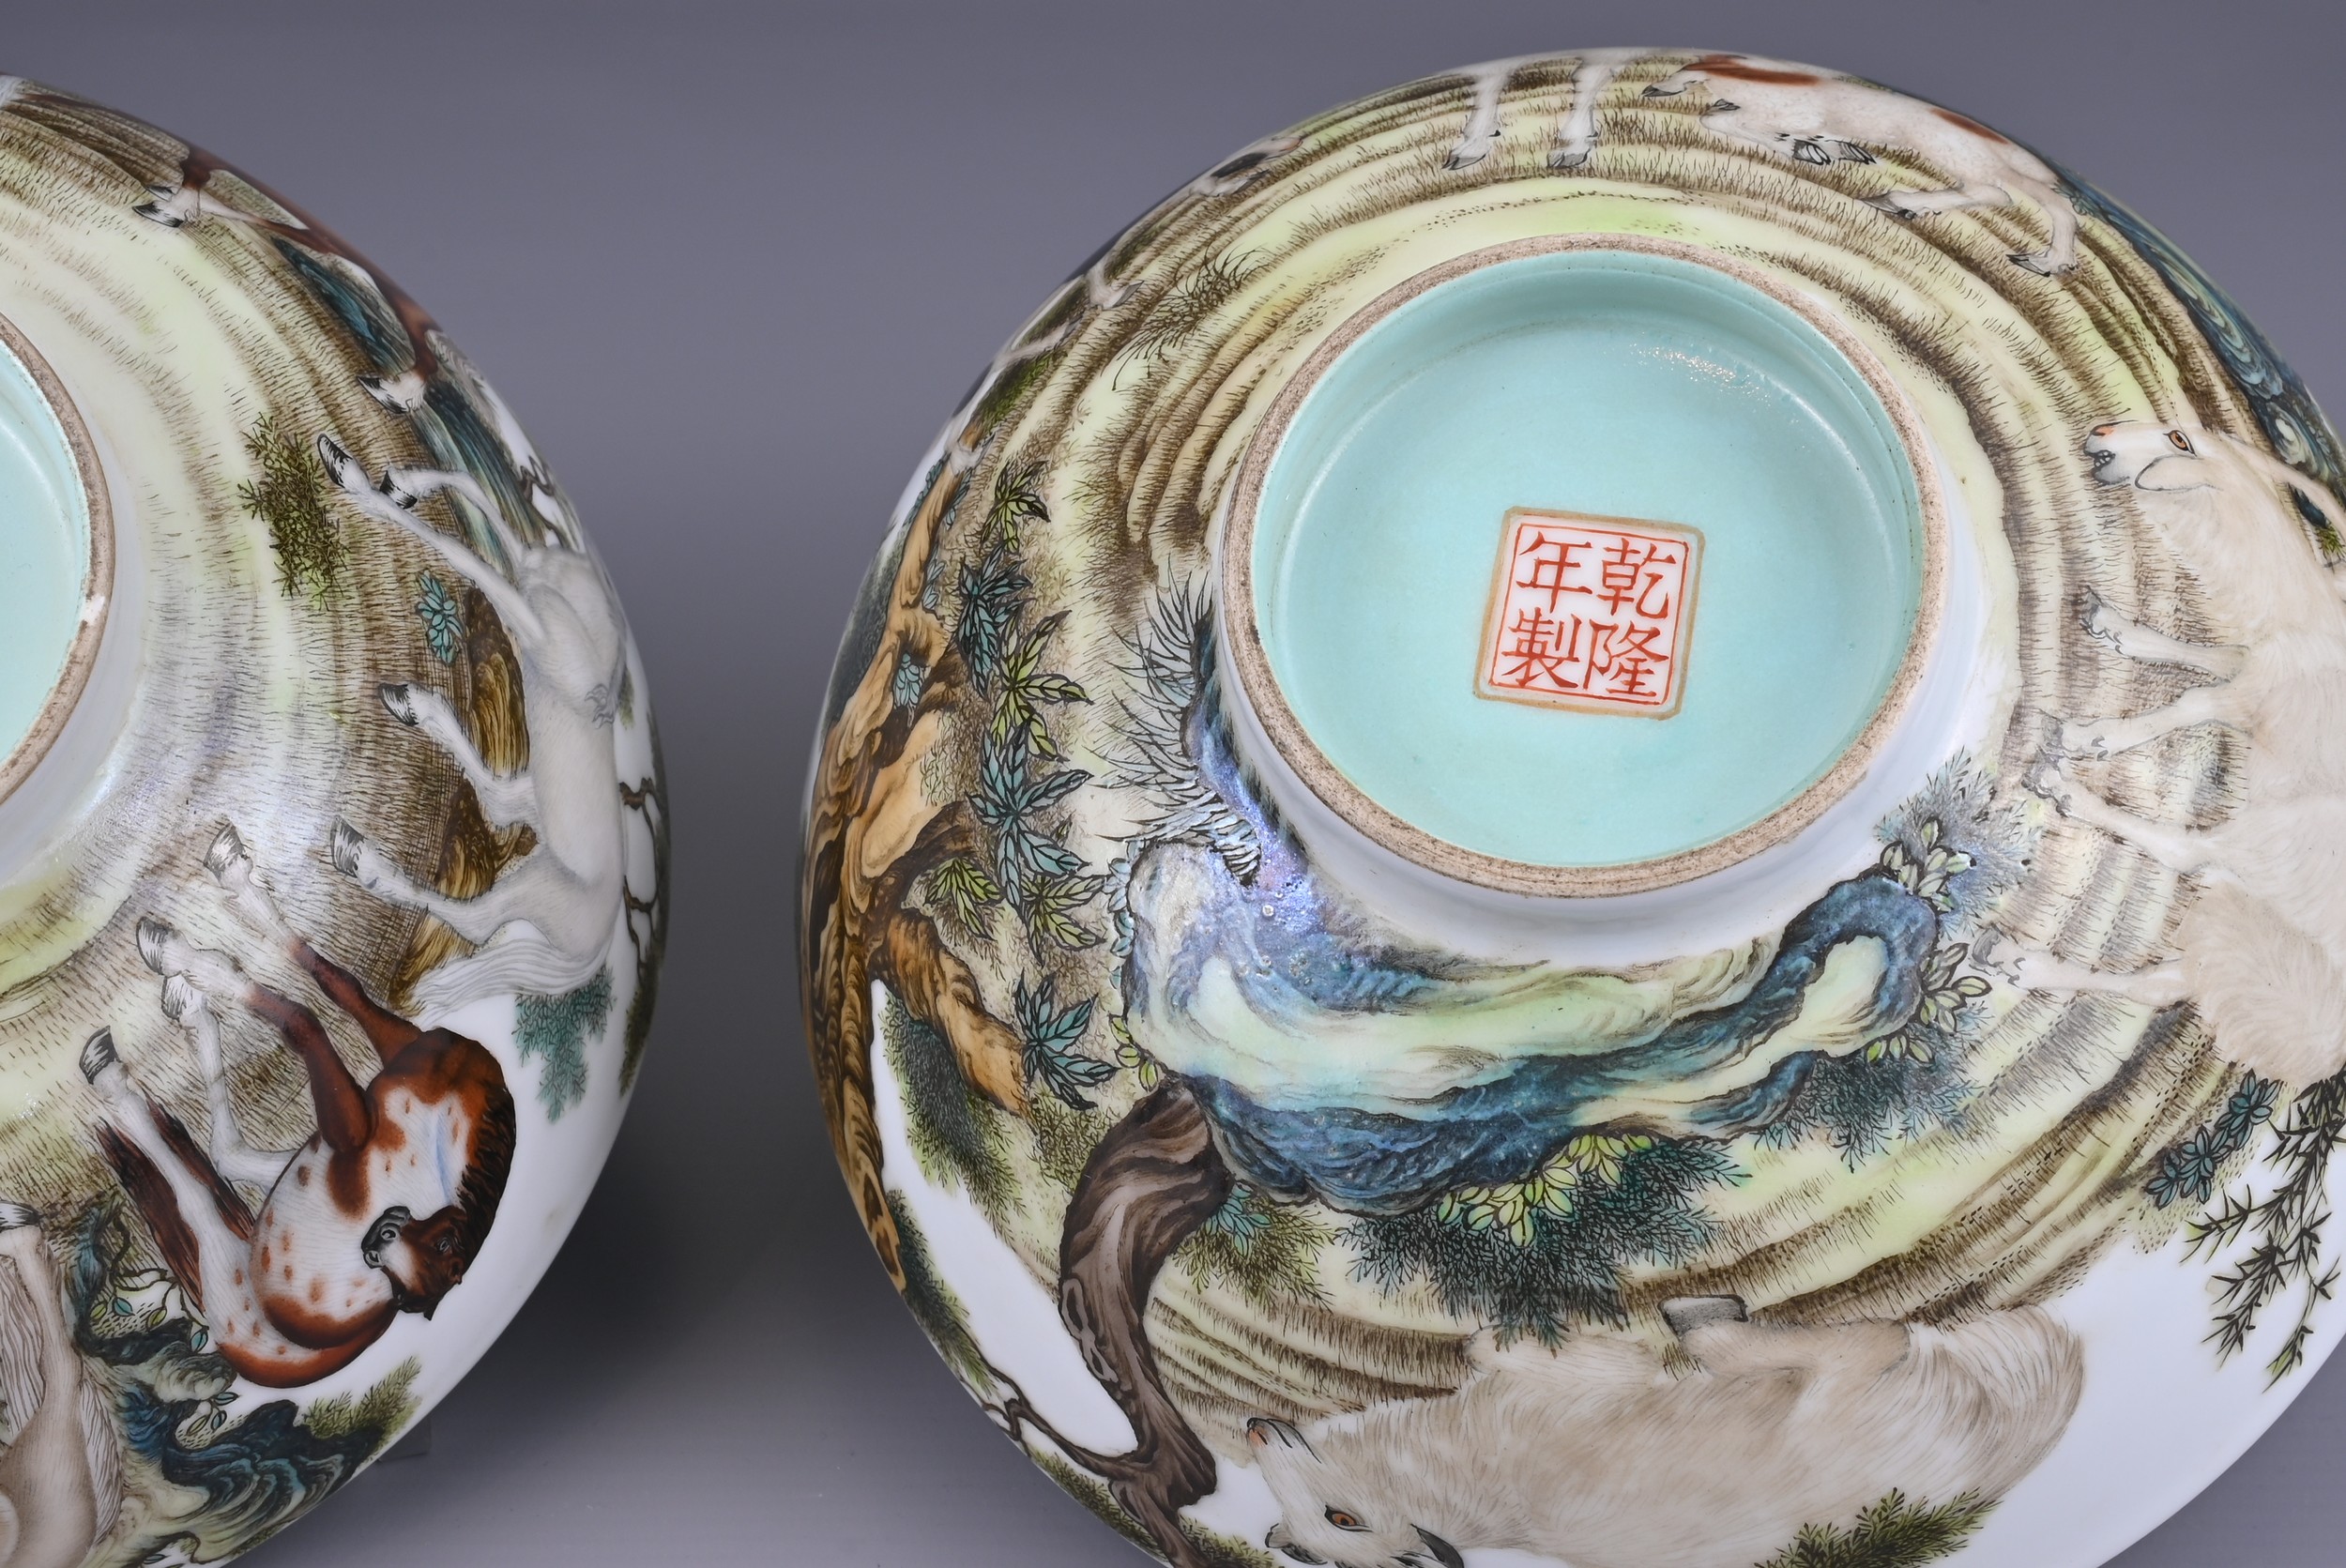 TWO CHINESE PORCELAIN BOWLS, 20TH CENTURY . Each with apocryphal four character Qianlong seal mark - Image 6 of 9